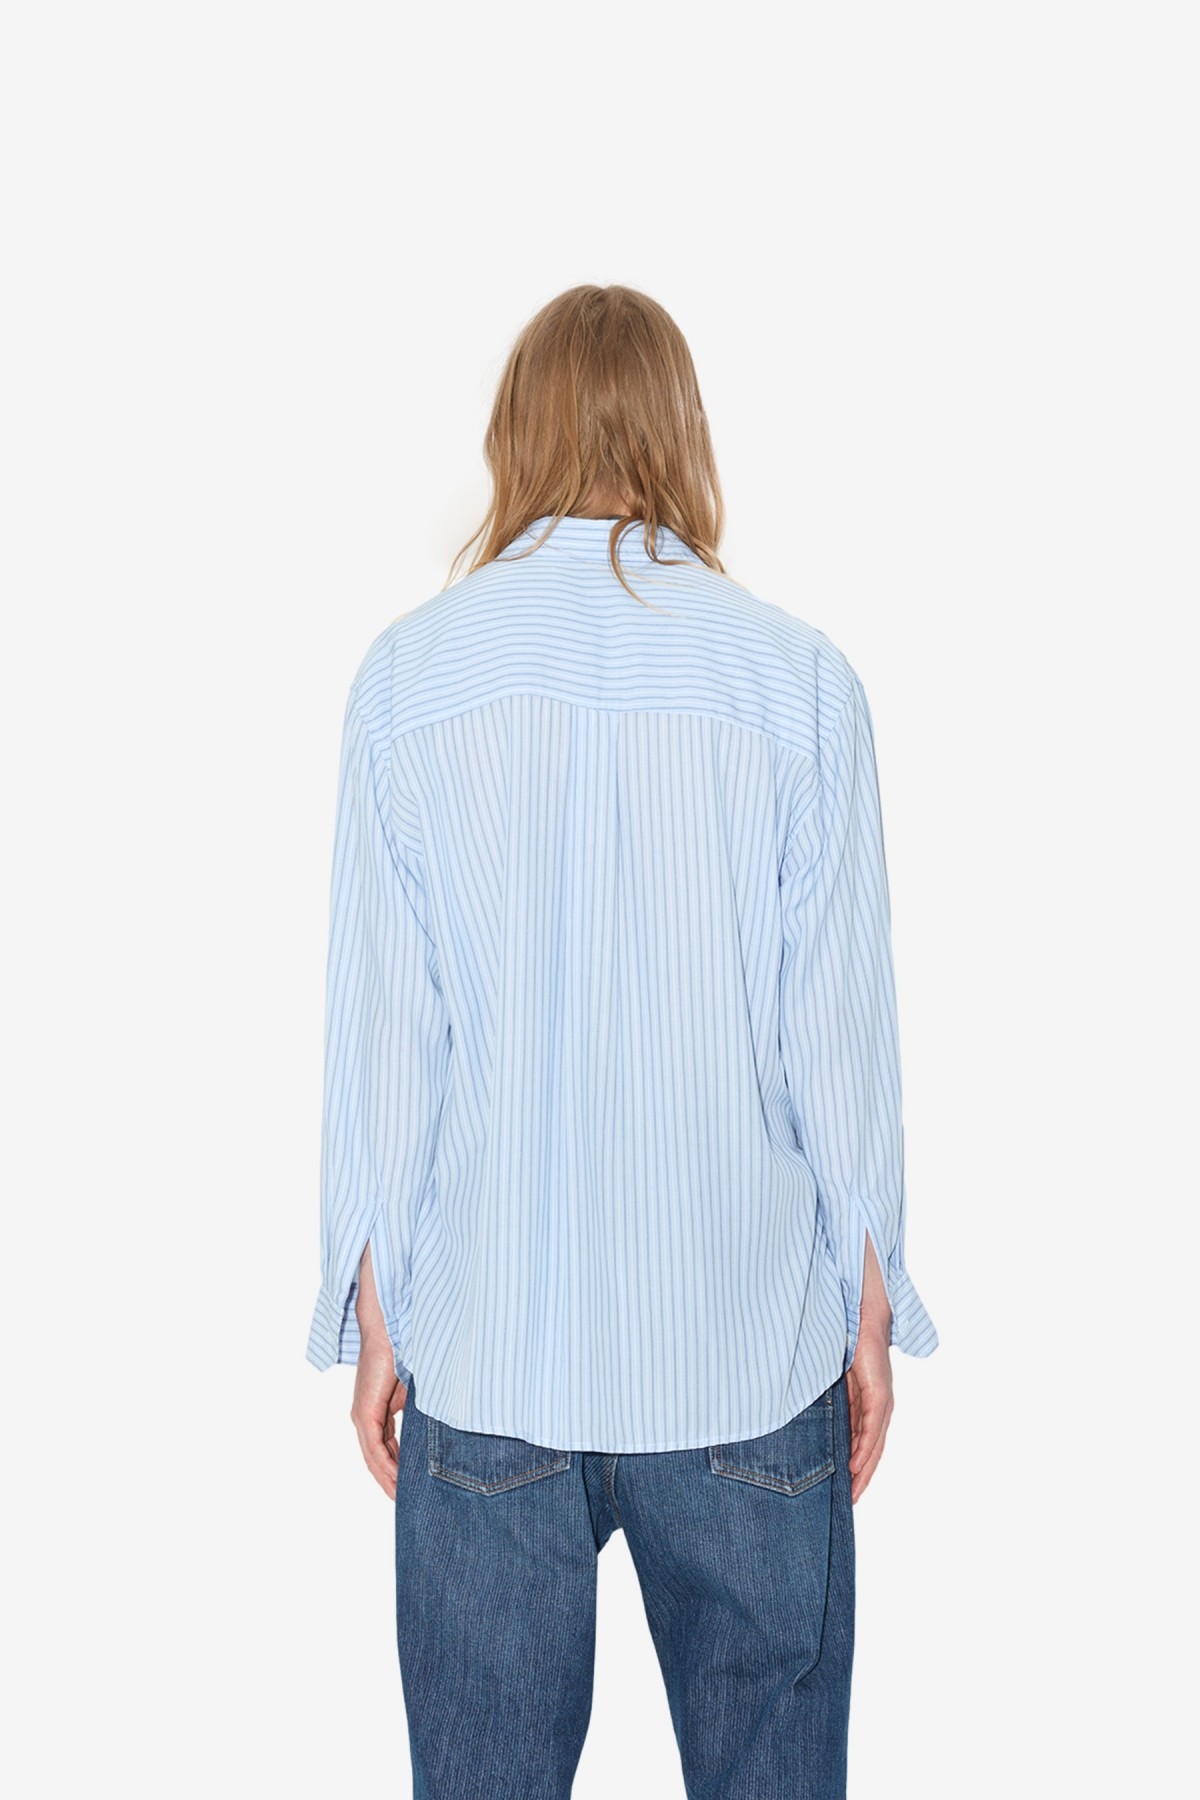 Our Legacy Above Shirt in Flat Corp Floating Tencel